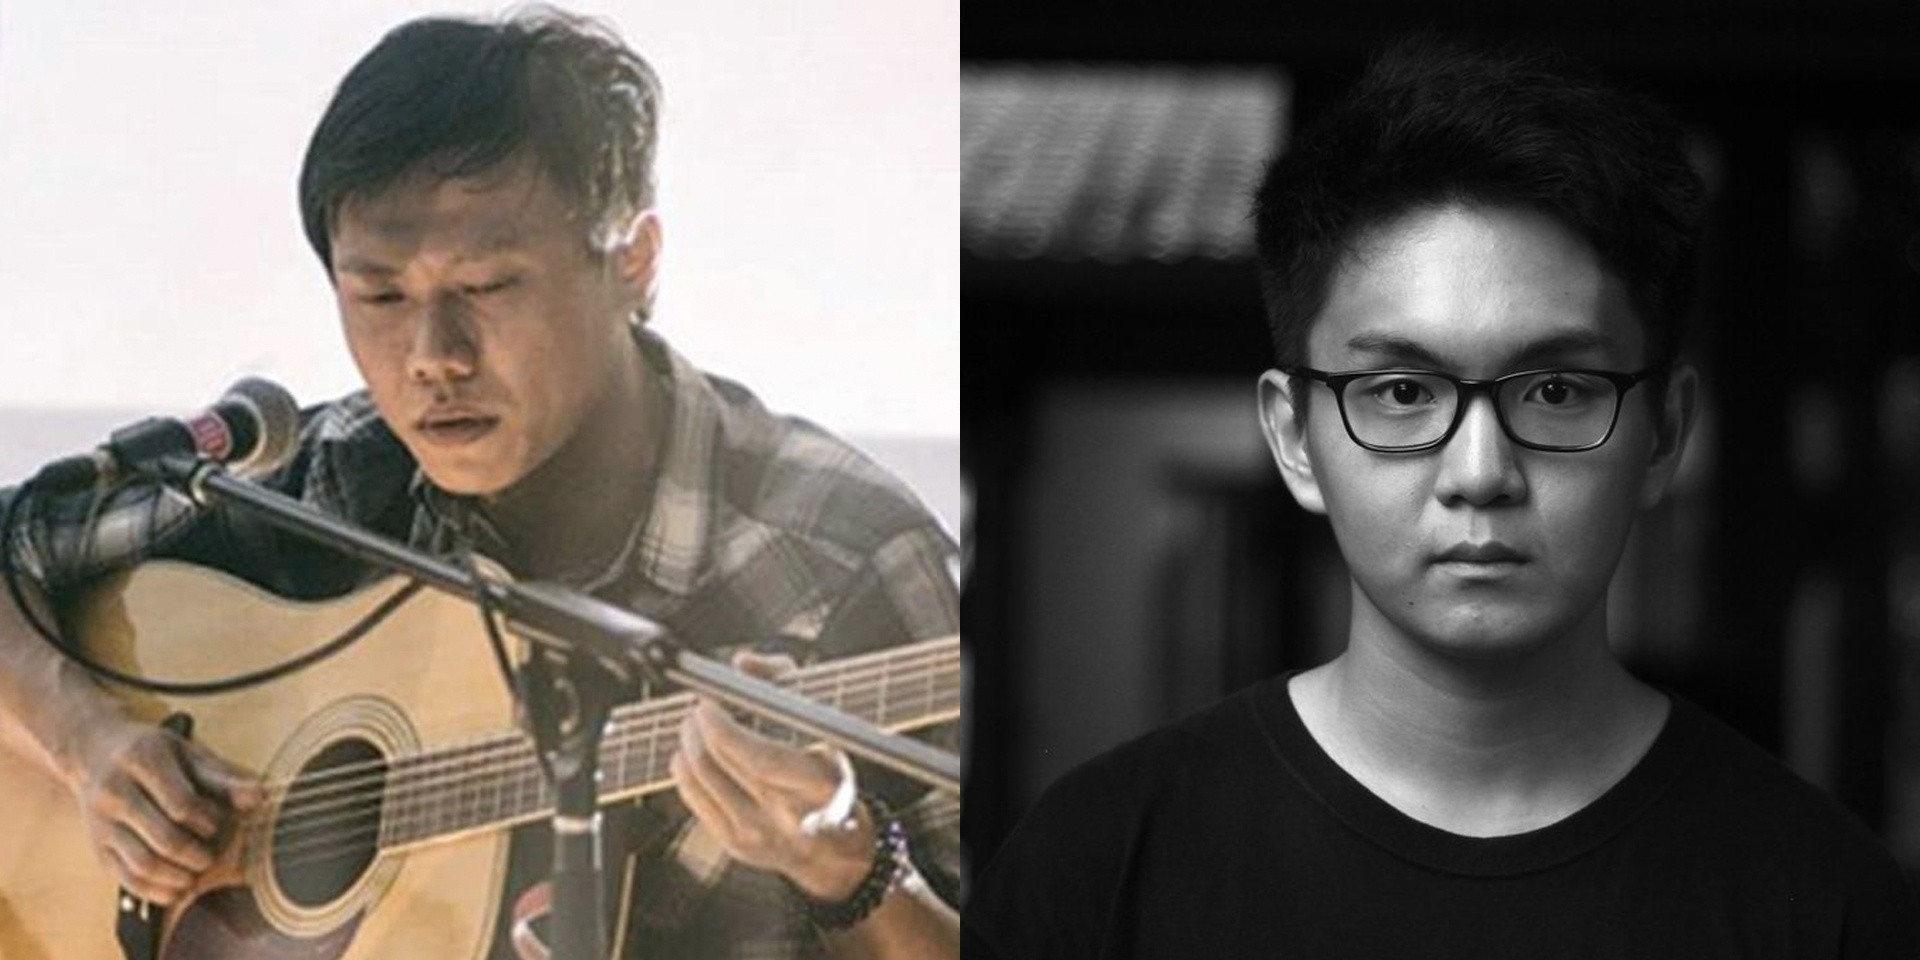 PIBLOKTO and Bennett Bay to release respective albums at Esplanade Recital Studio in January 2017